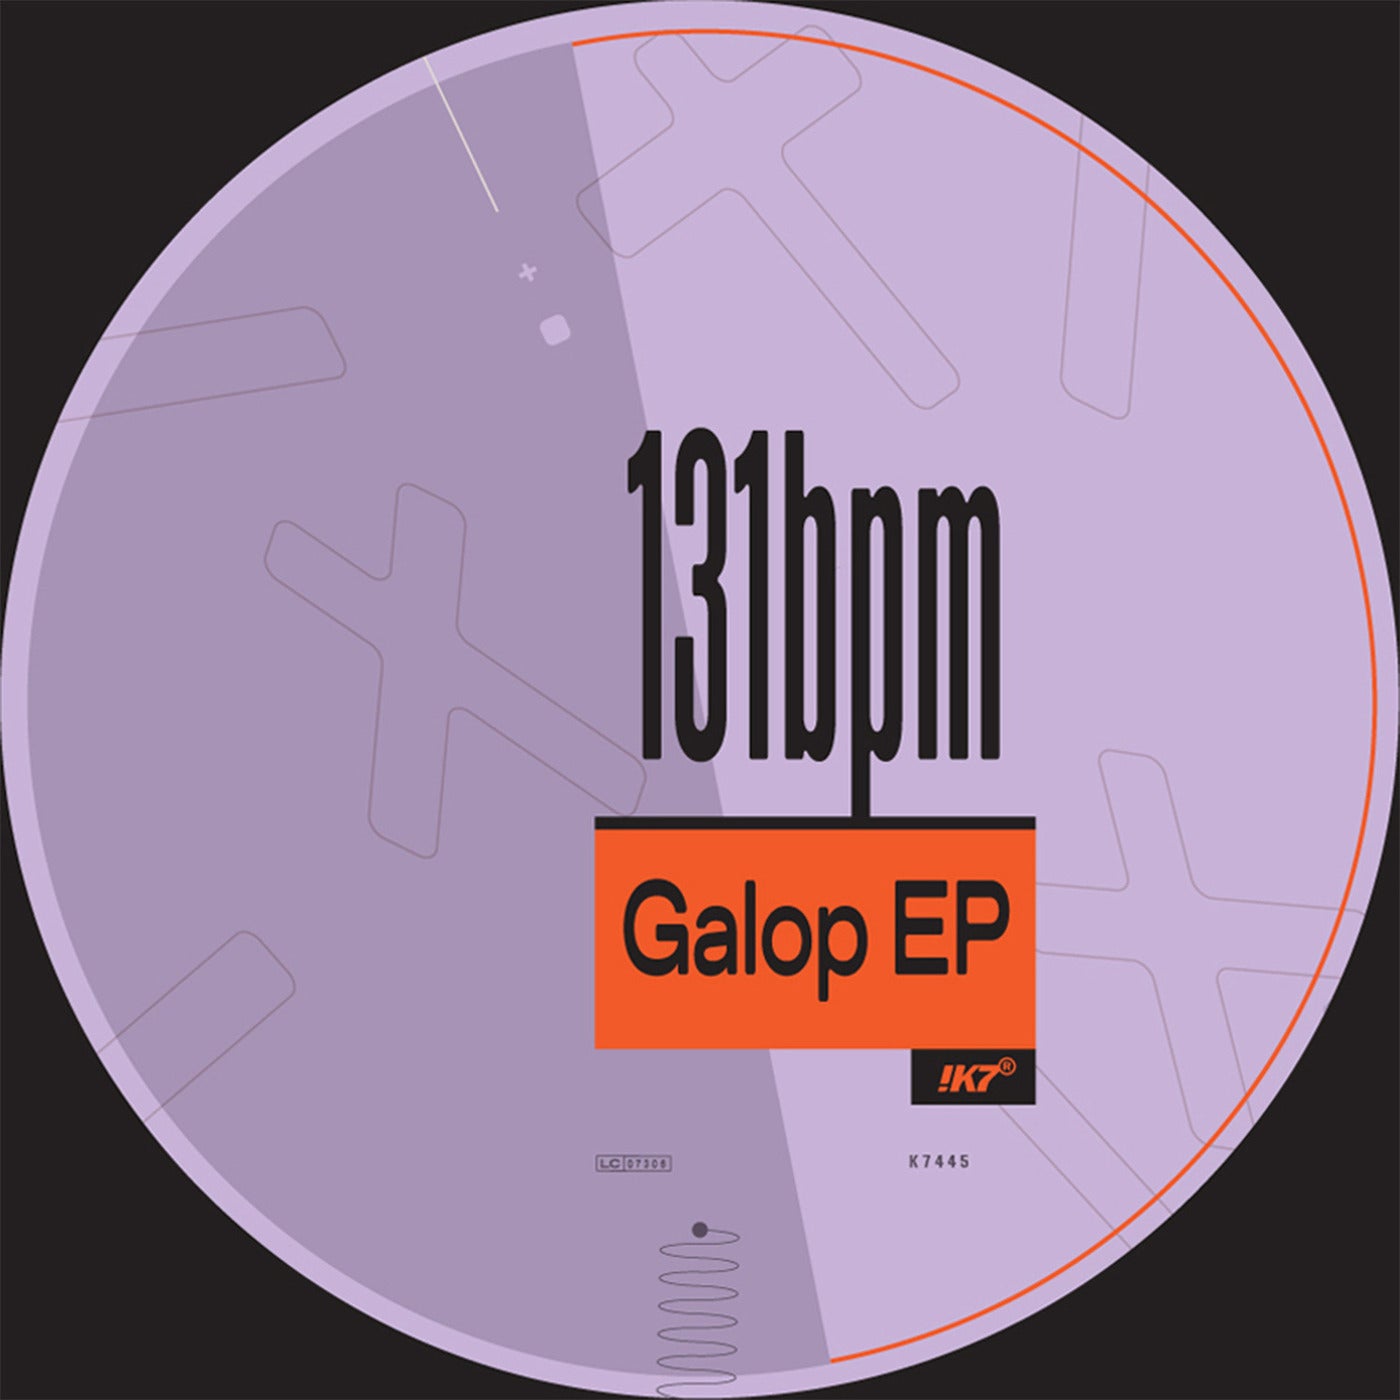 Galop EP